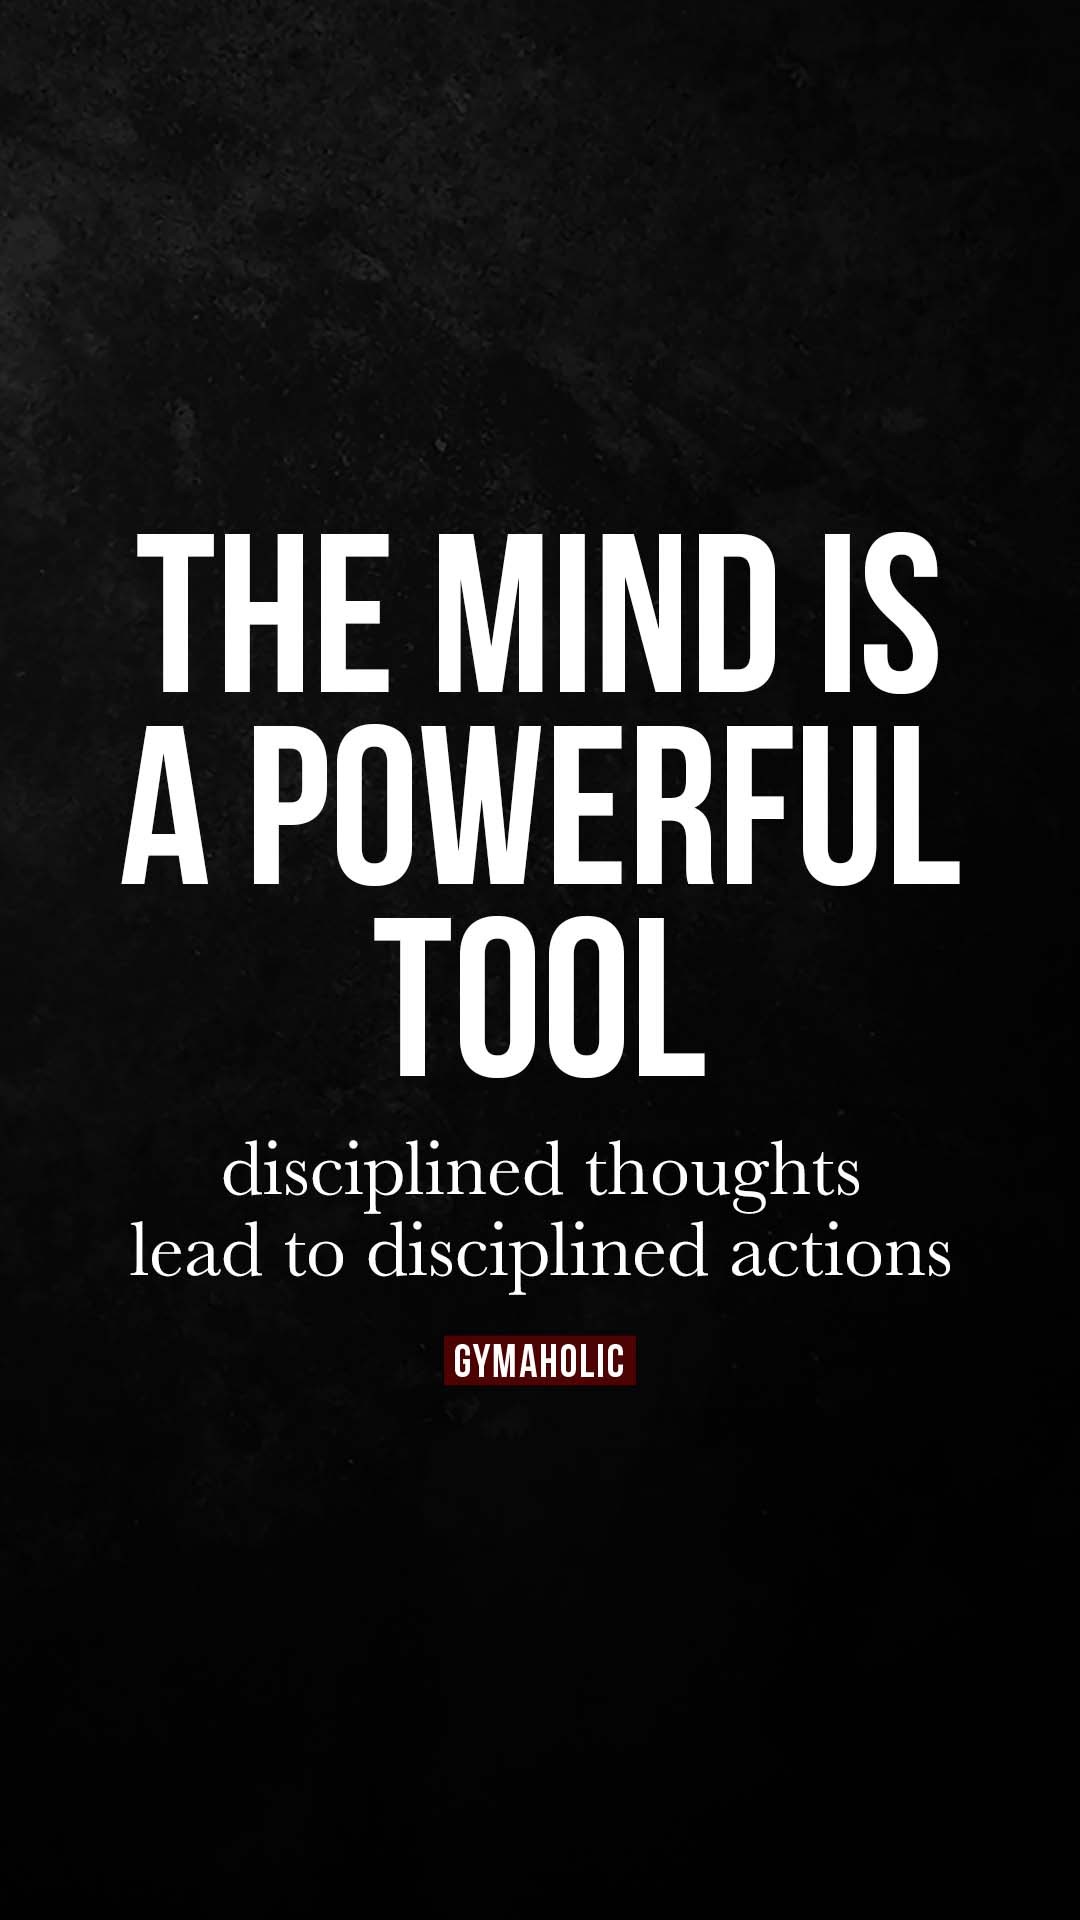 The mind is a powerful tool